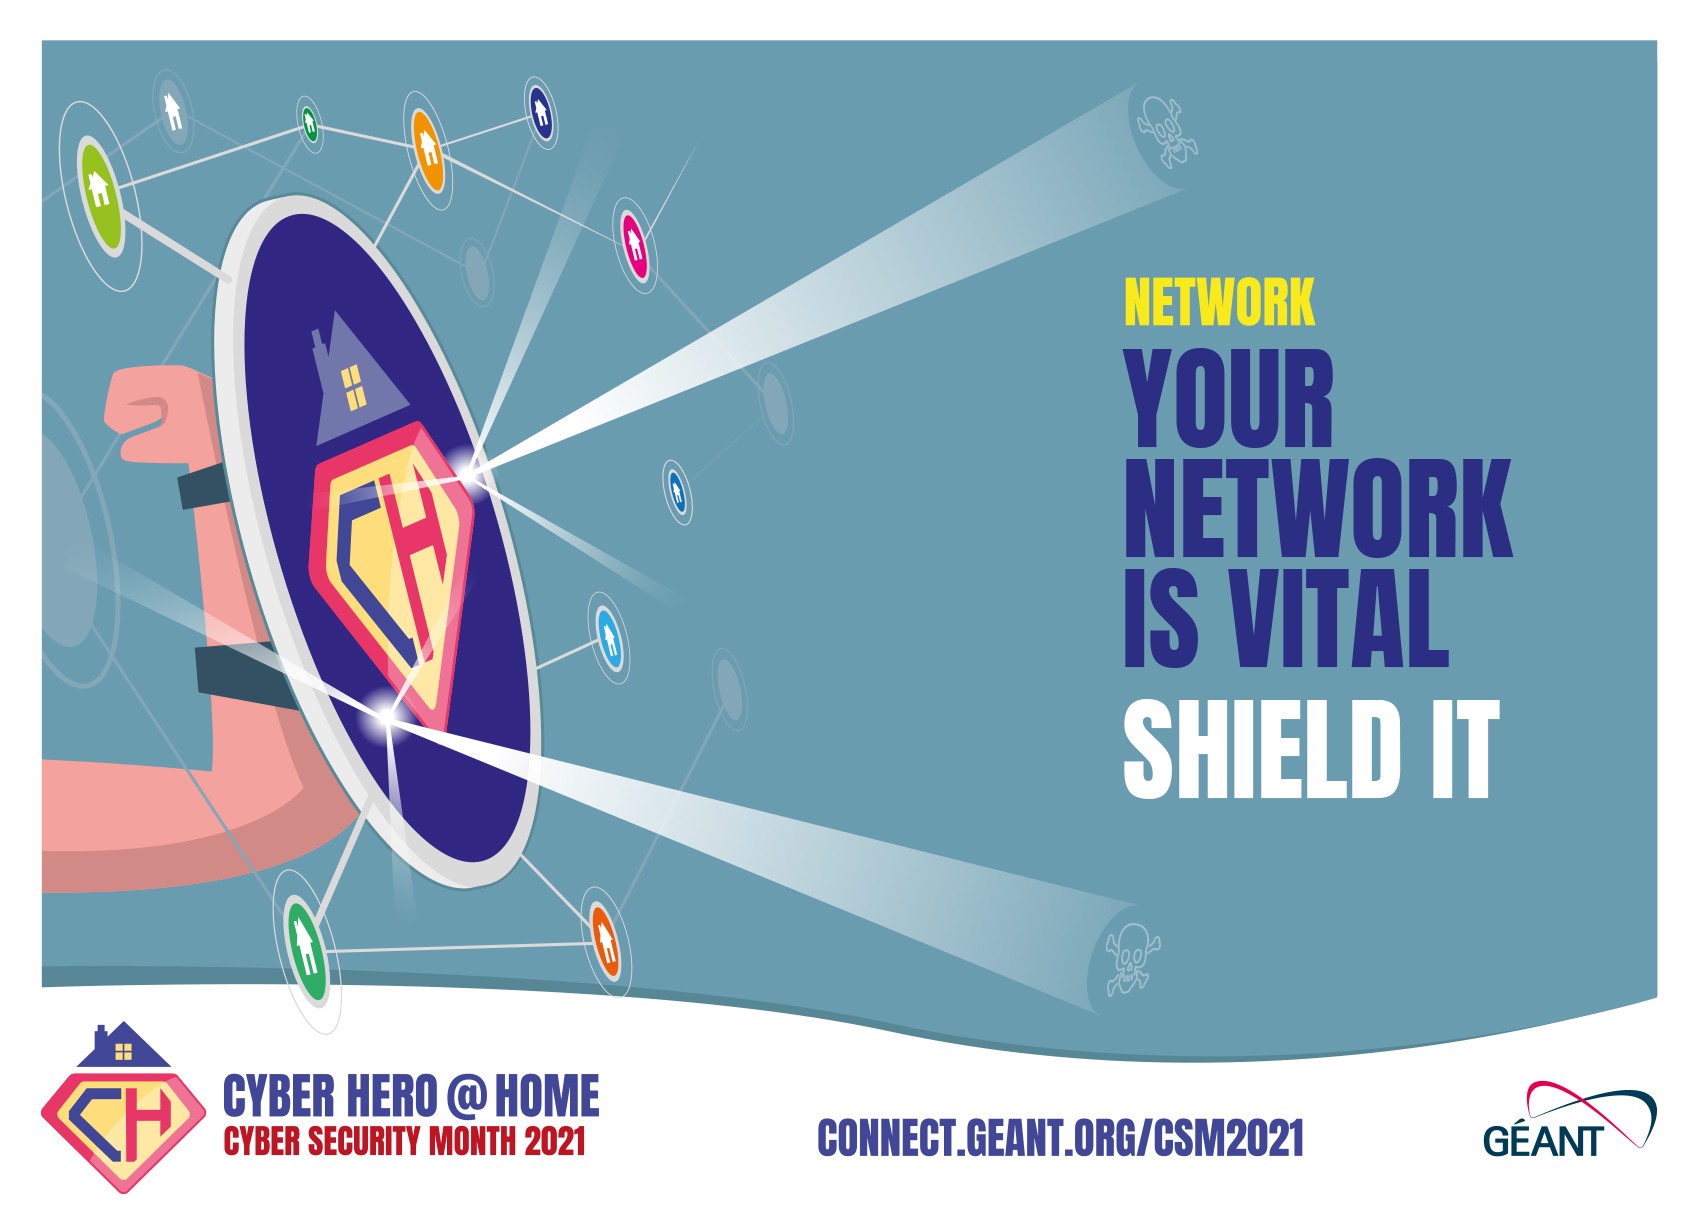 Campaign image for the topic 'Protect your network"